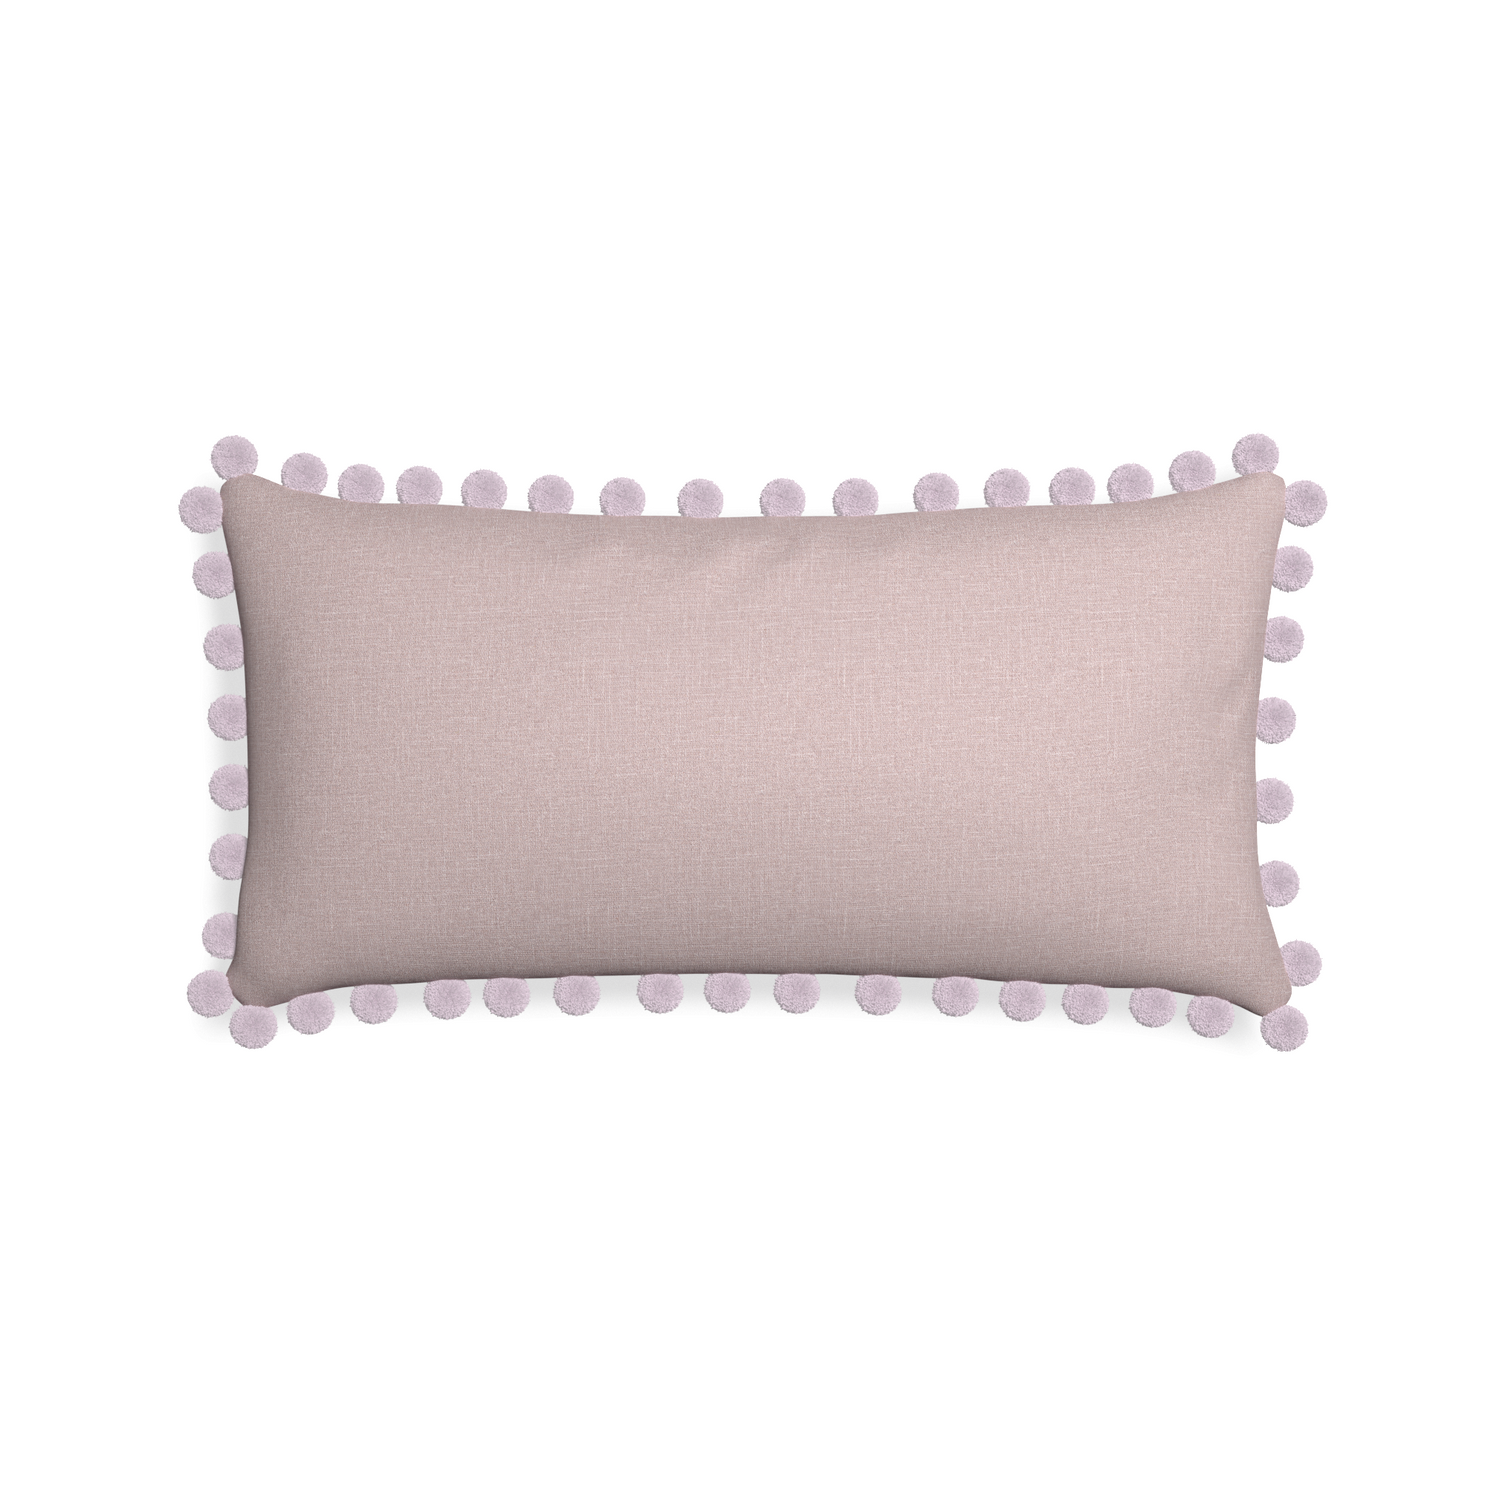 Midi-lumbar orchid custom mauve pinkpillow with l on white background